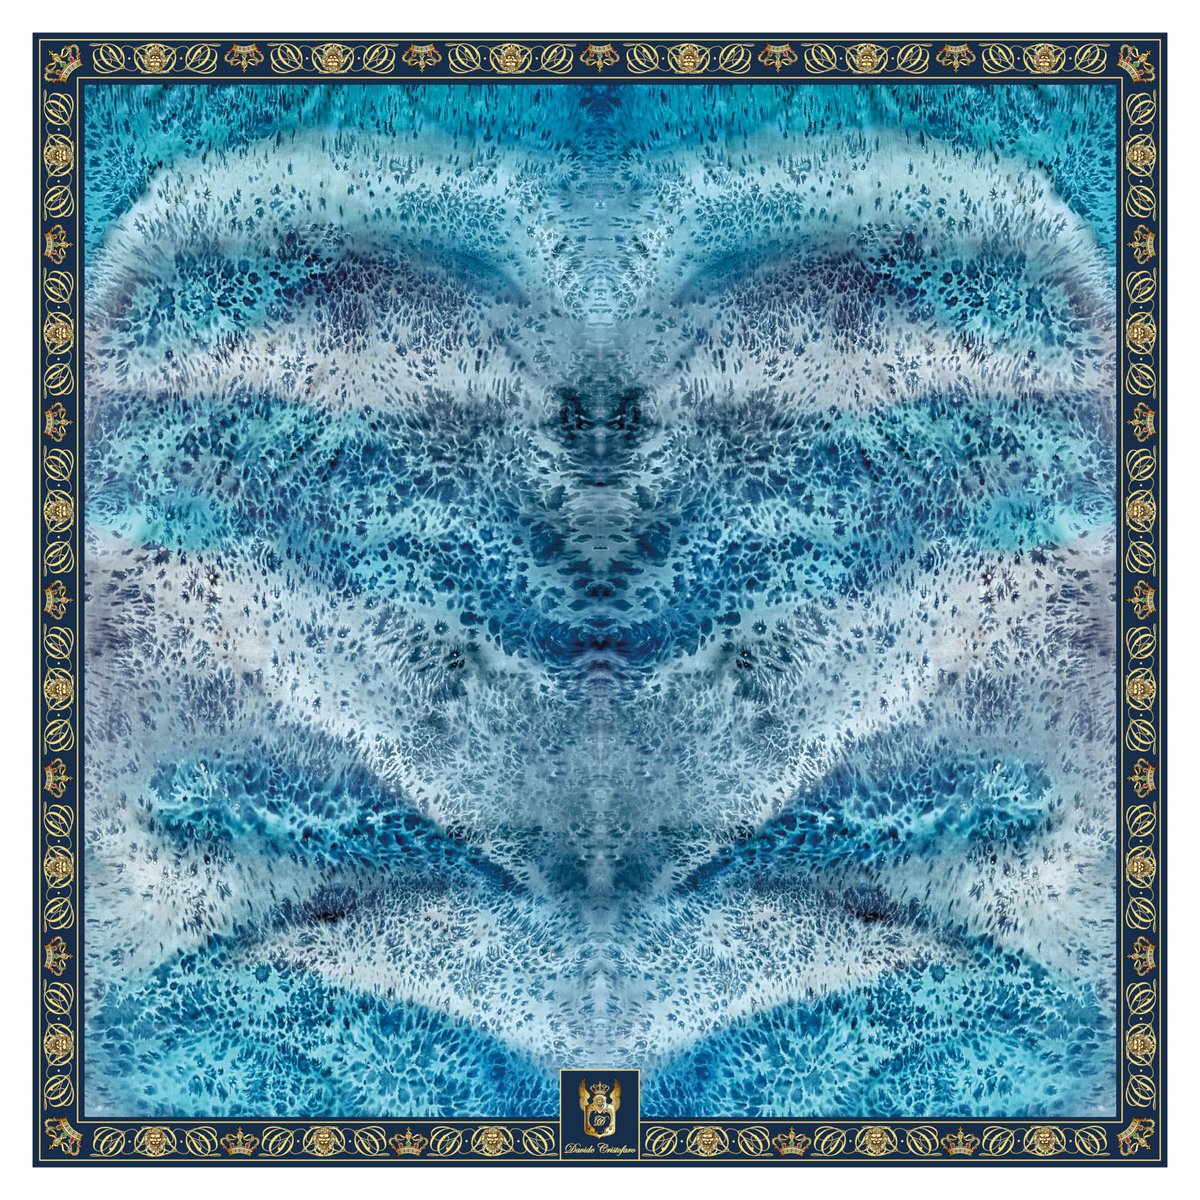 Refresh your look, explore new perspectives.
“DEEP BLUE” Scarf available in Cotton/Silk Fabric, Silk, Chiffon or Cashmere.
Pre-Order your scarf...
Discover more on:
davidecristofaro.com
#davidecristofarofficial #collaboration #fluiditycollection #promotion #menwears #fashion